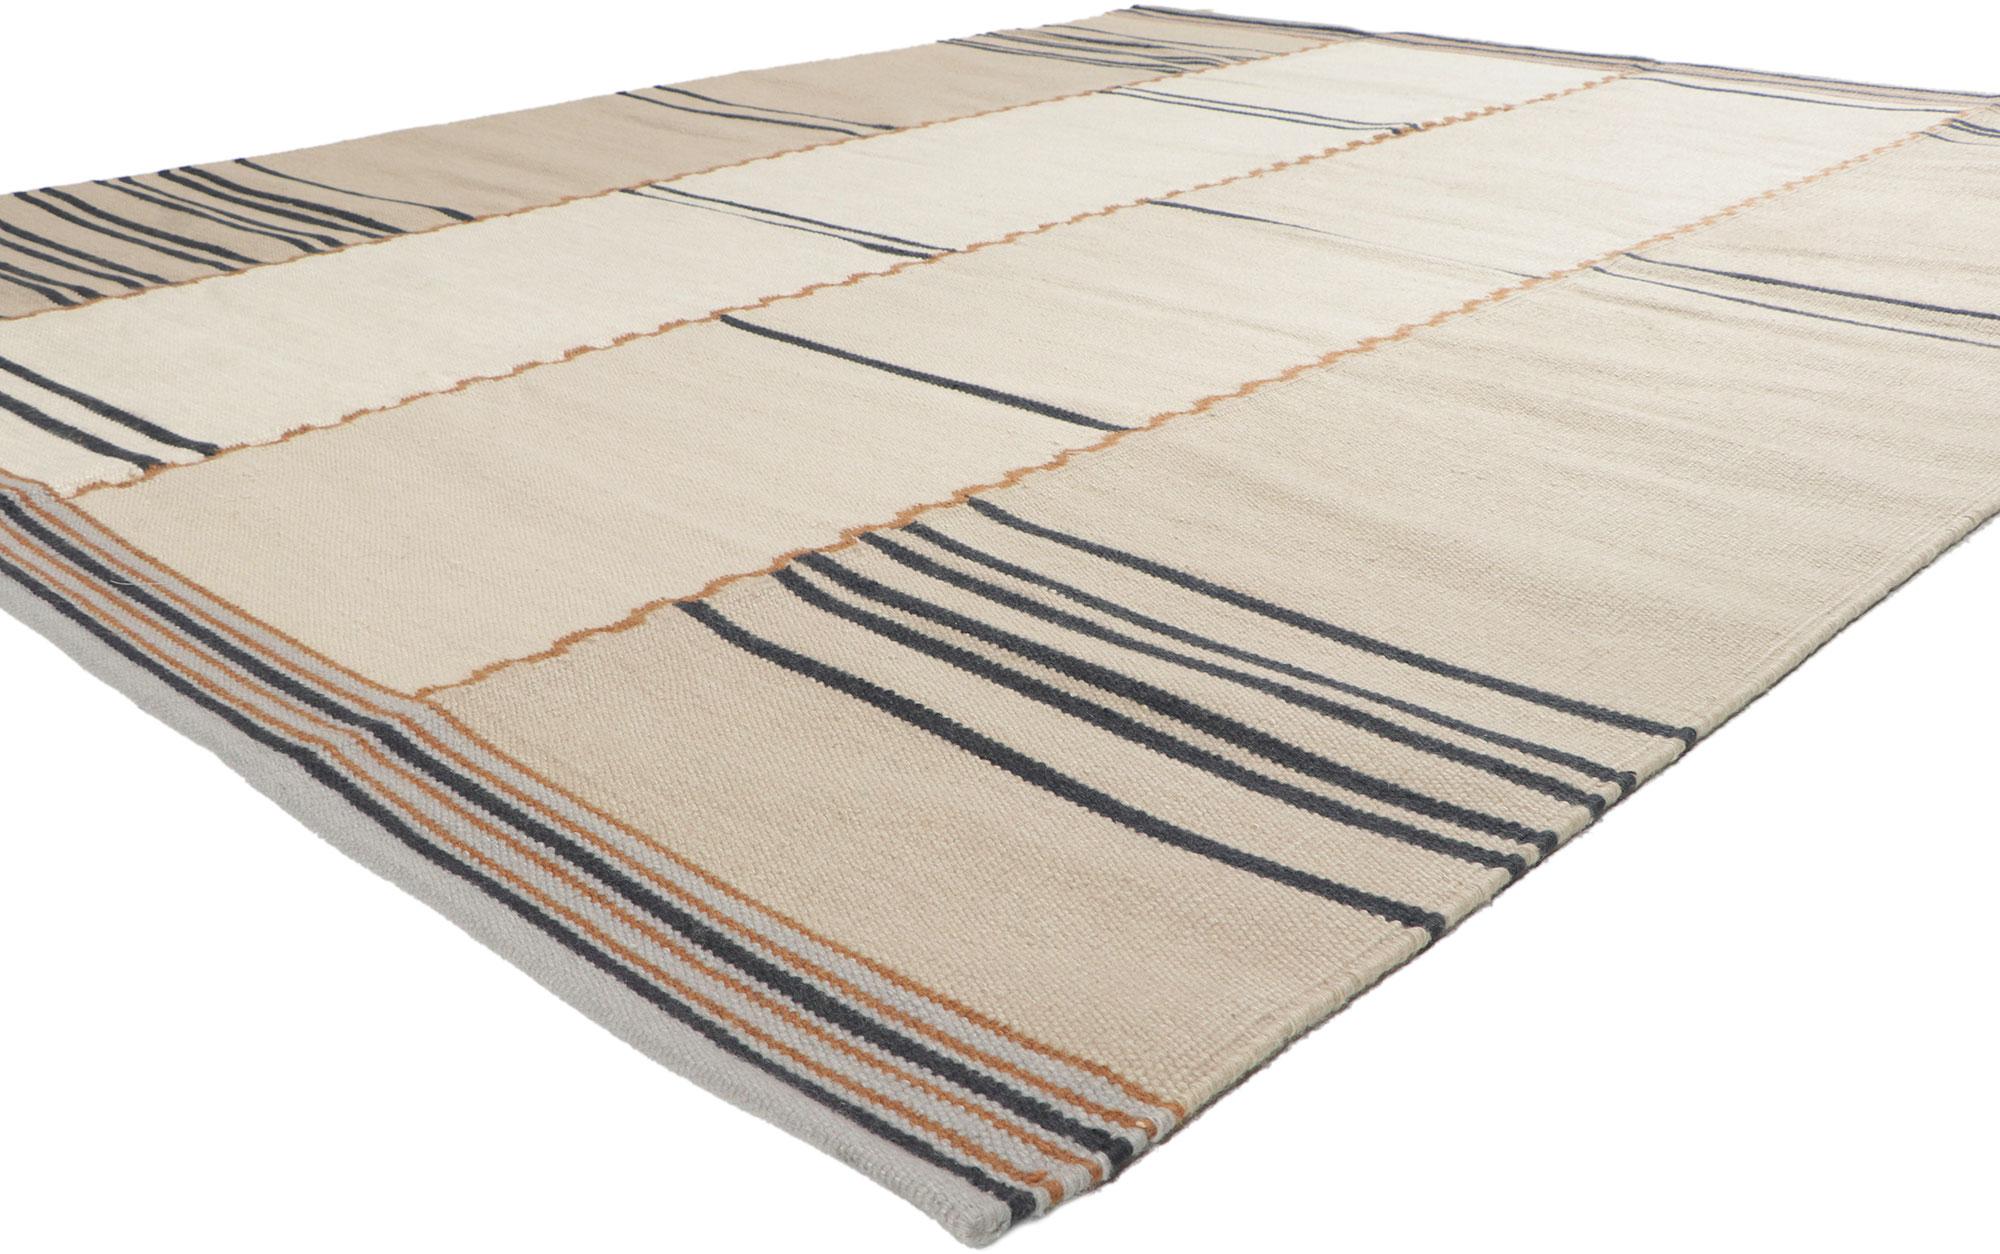 30954 New Swedish Inspired Kilim Rug, 08'01 x 10'00. Displaying simplicity with incredible detail and texture, this handwoven wool Swedish inspired Kilim rug provides a feeling of cozy contentment without the clutter. The eye-catching ladder stripe